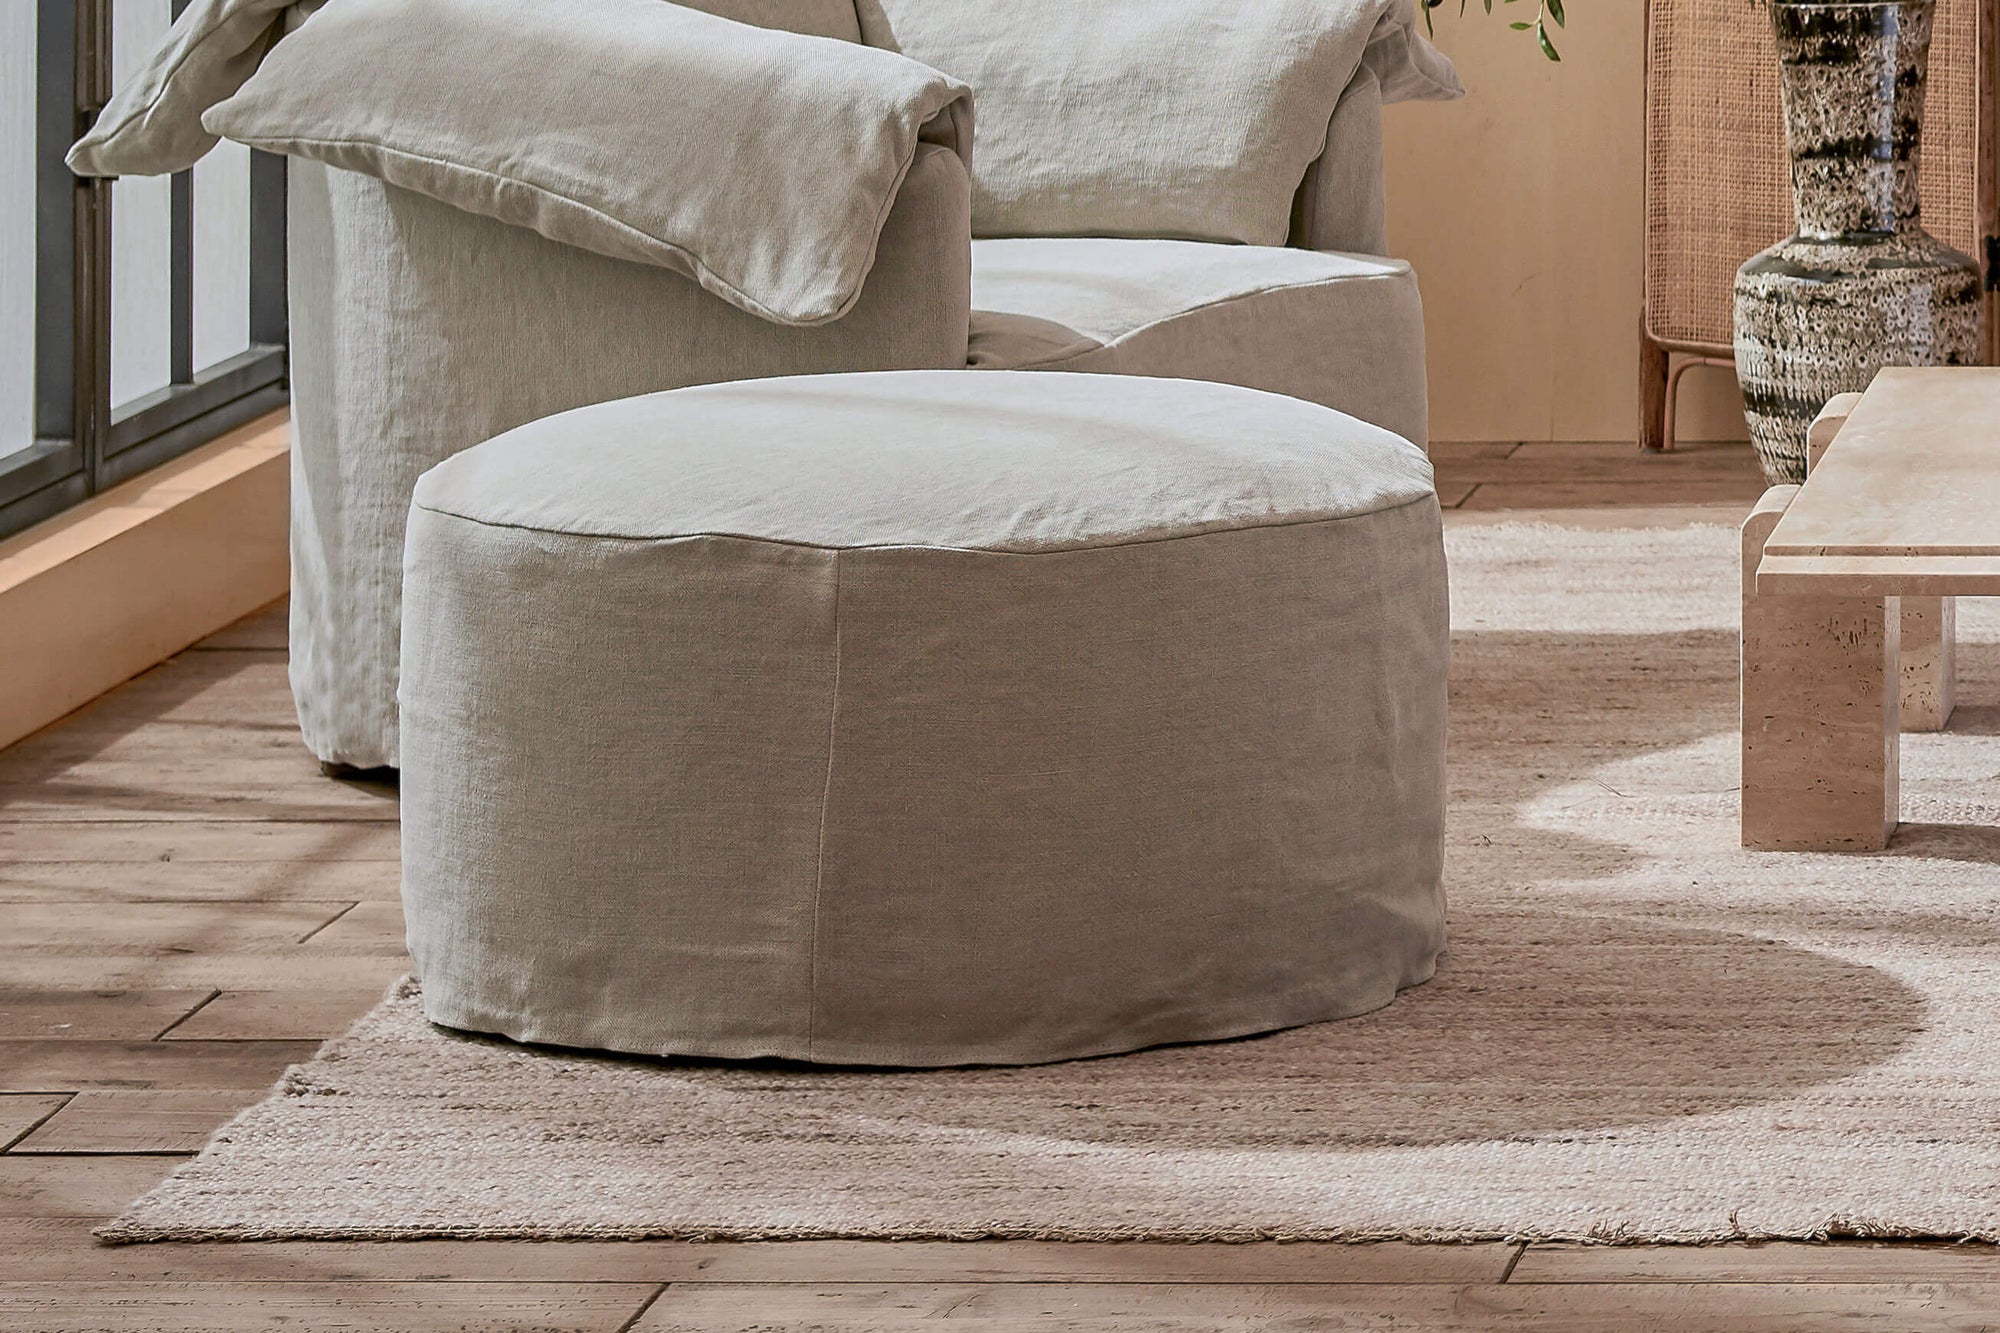 Loula chair ottoman in Jasmine Rice, a light warm greige Medium Weight Linen, placed next to Loula Chair